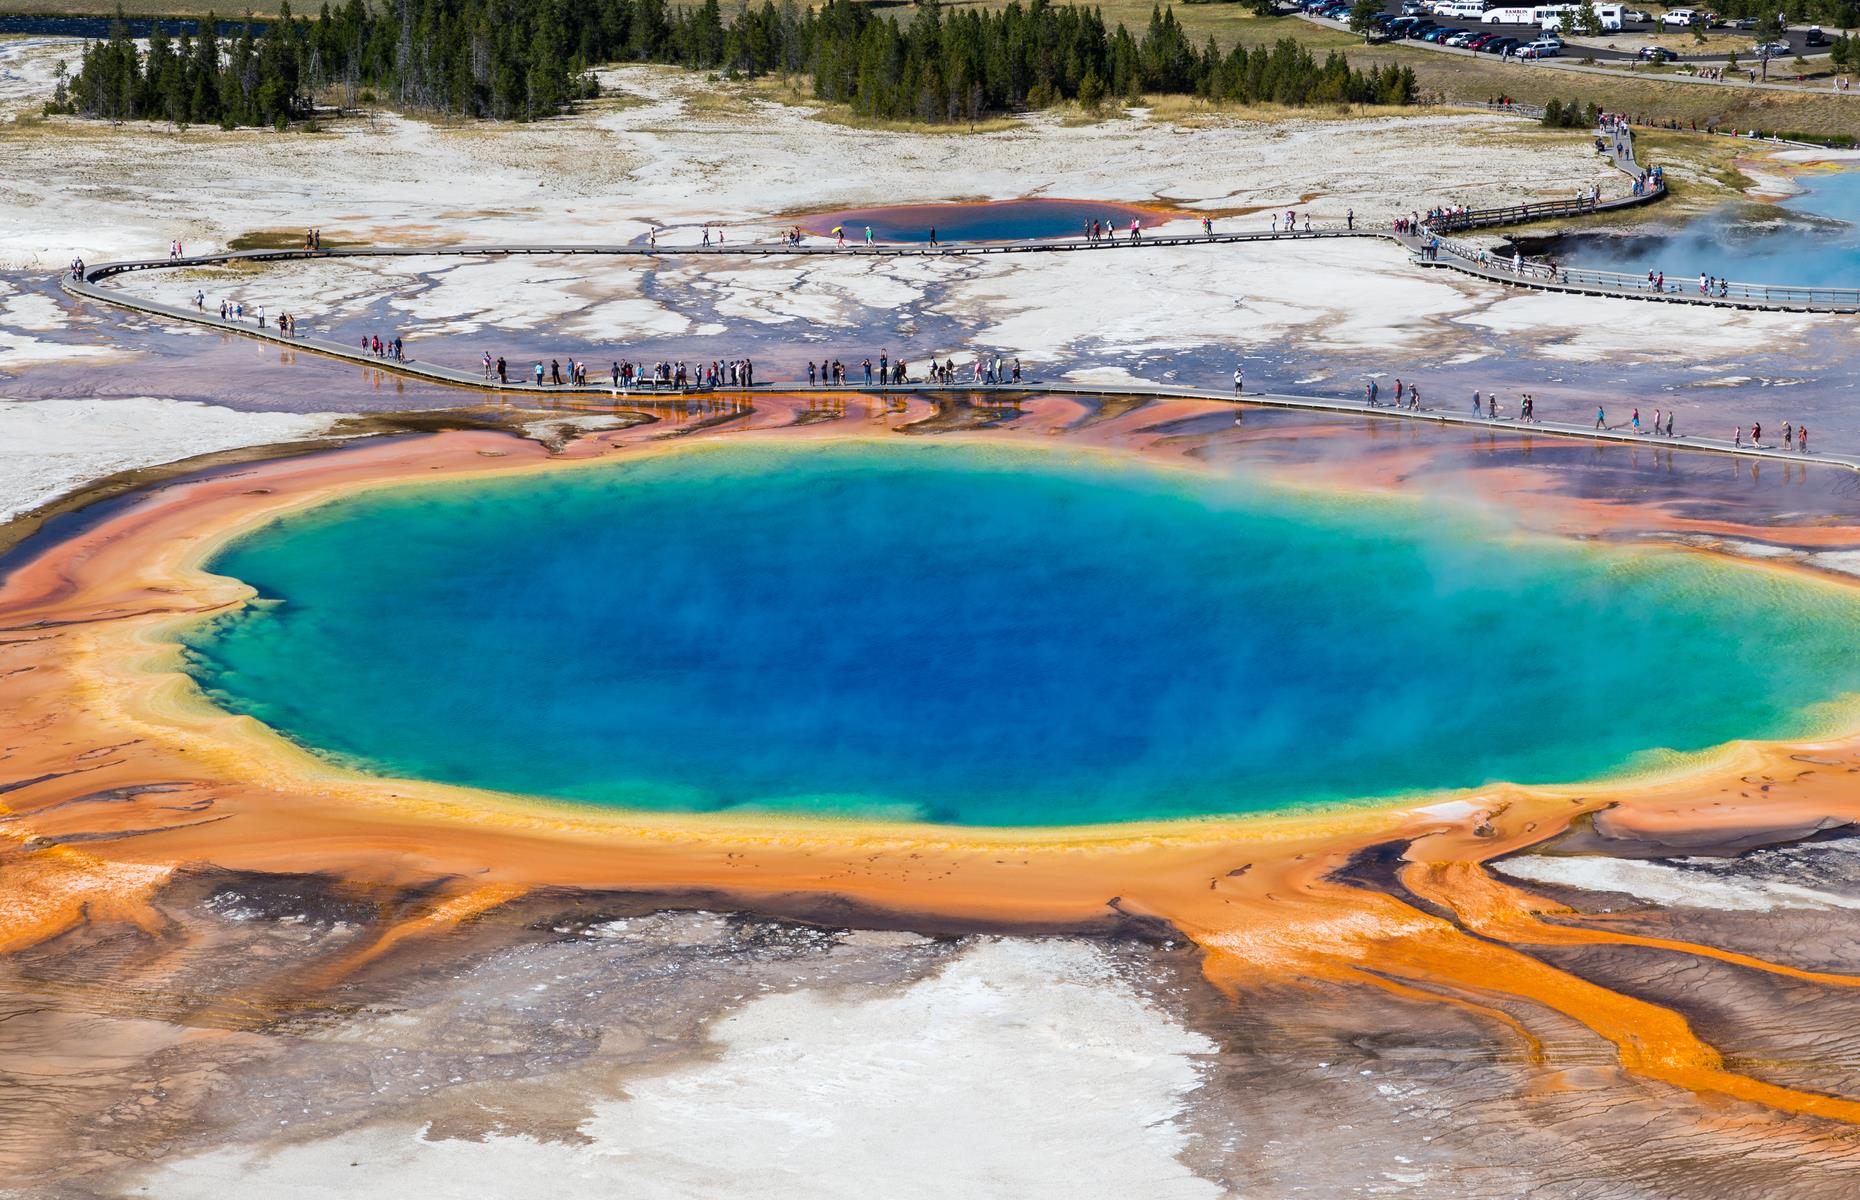 <p>With its vivid blue centre, surrounded by bands of yellow, rusty orange and green, Grand Prismatic Spring in Yellowstone National Park looks almost otherworldly. The depths of this lake, filled with bubbling thermal waters, plunge as deep as 160 feet (49m). The psychedelic colours are caused by bacteria in the water. You can't bathe here, but head north to Mammoth to enjoy a soak in Boiling River. </p>